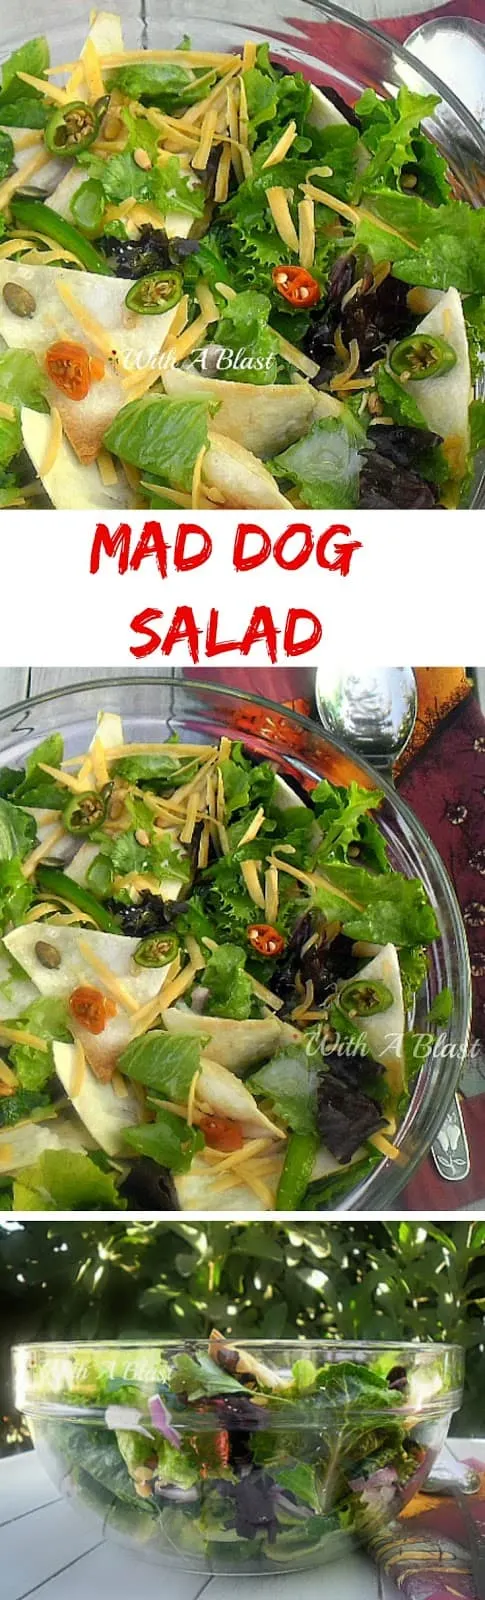 Everything nice and spicy in this Mad Dog Salad ! Crunchy Tortilla chips, herbs, lettuce, nuts, seeds and so much more #CrunchySalad #SaladRecipes #SpicySalad #TortillaChipSalad